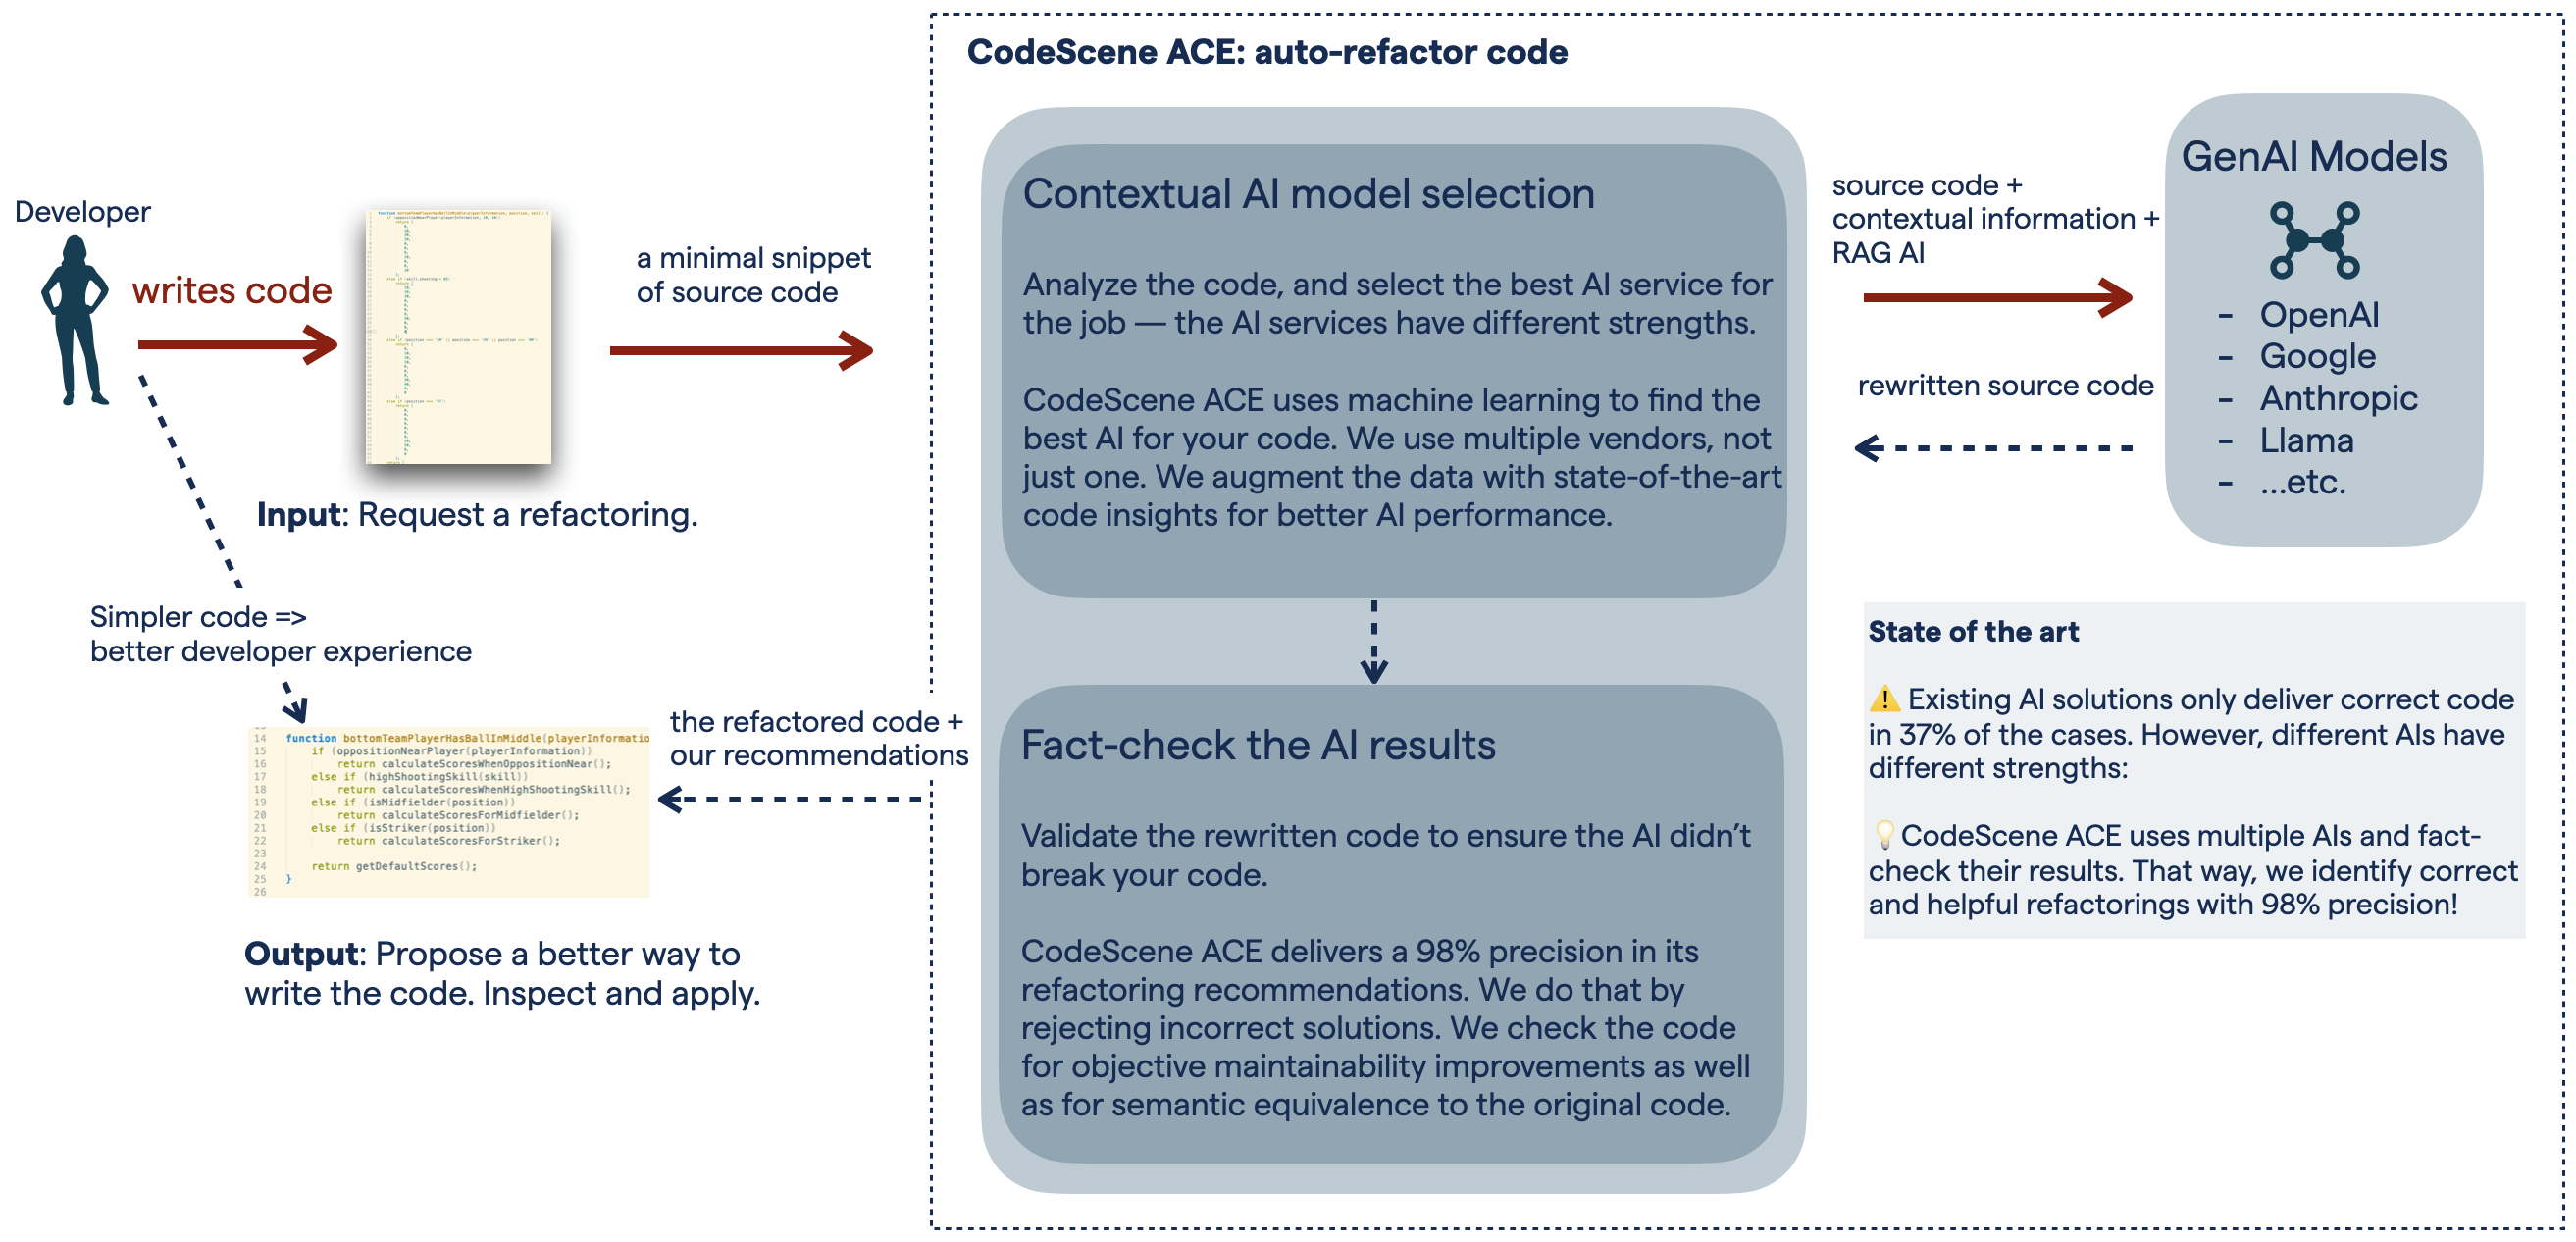 CodeScene ACE uses multiple AI services and its own fact-checking to deliver high-precision refactoring solutions.